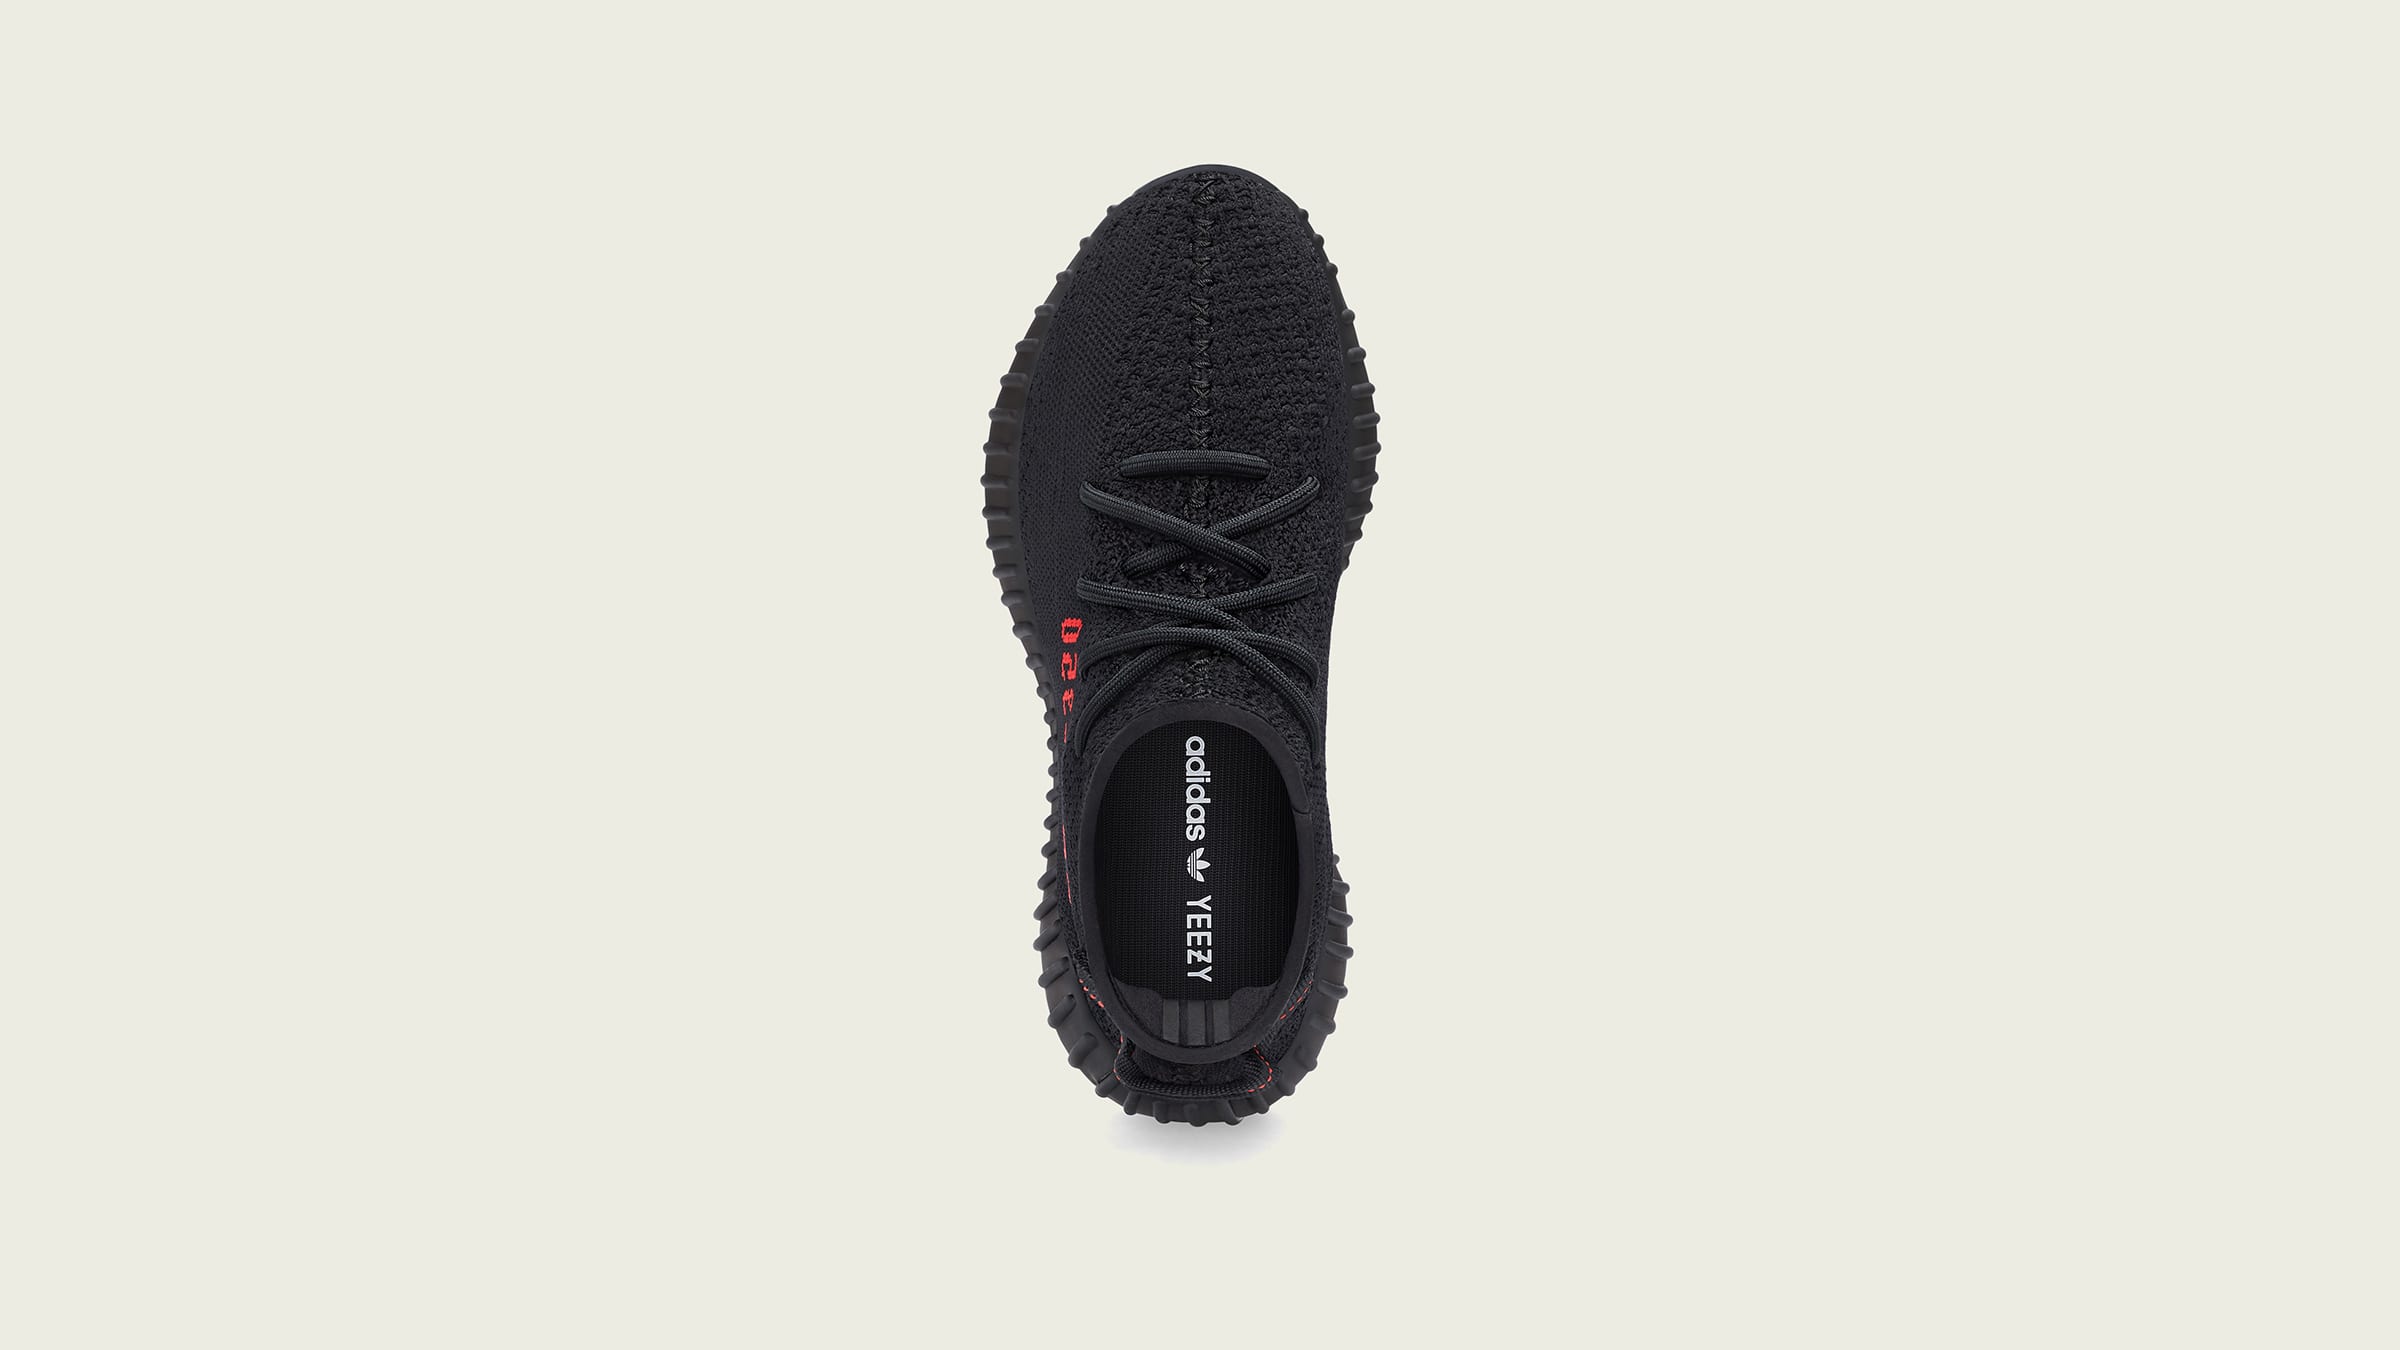 Yeezy Boost 350 V1 Pirate Black UK8 100% Authentic Comes